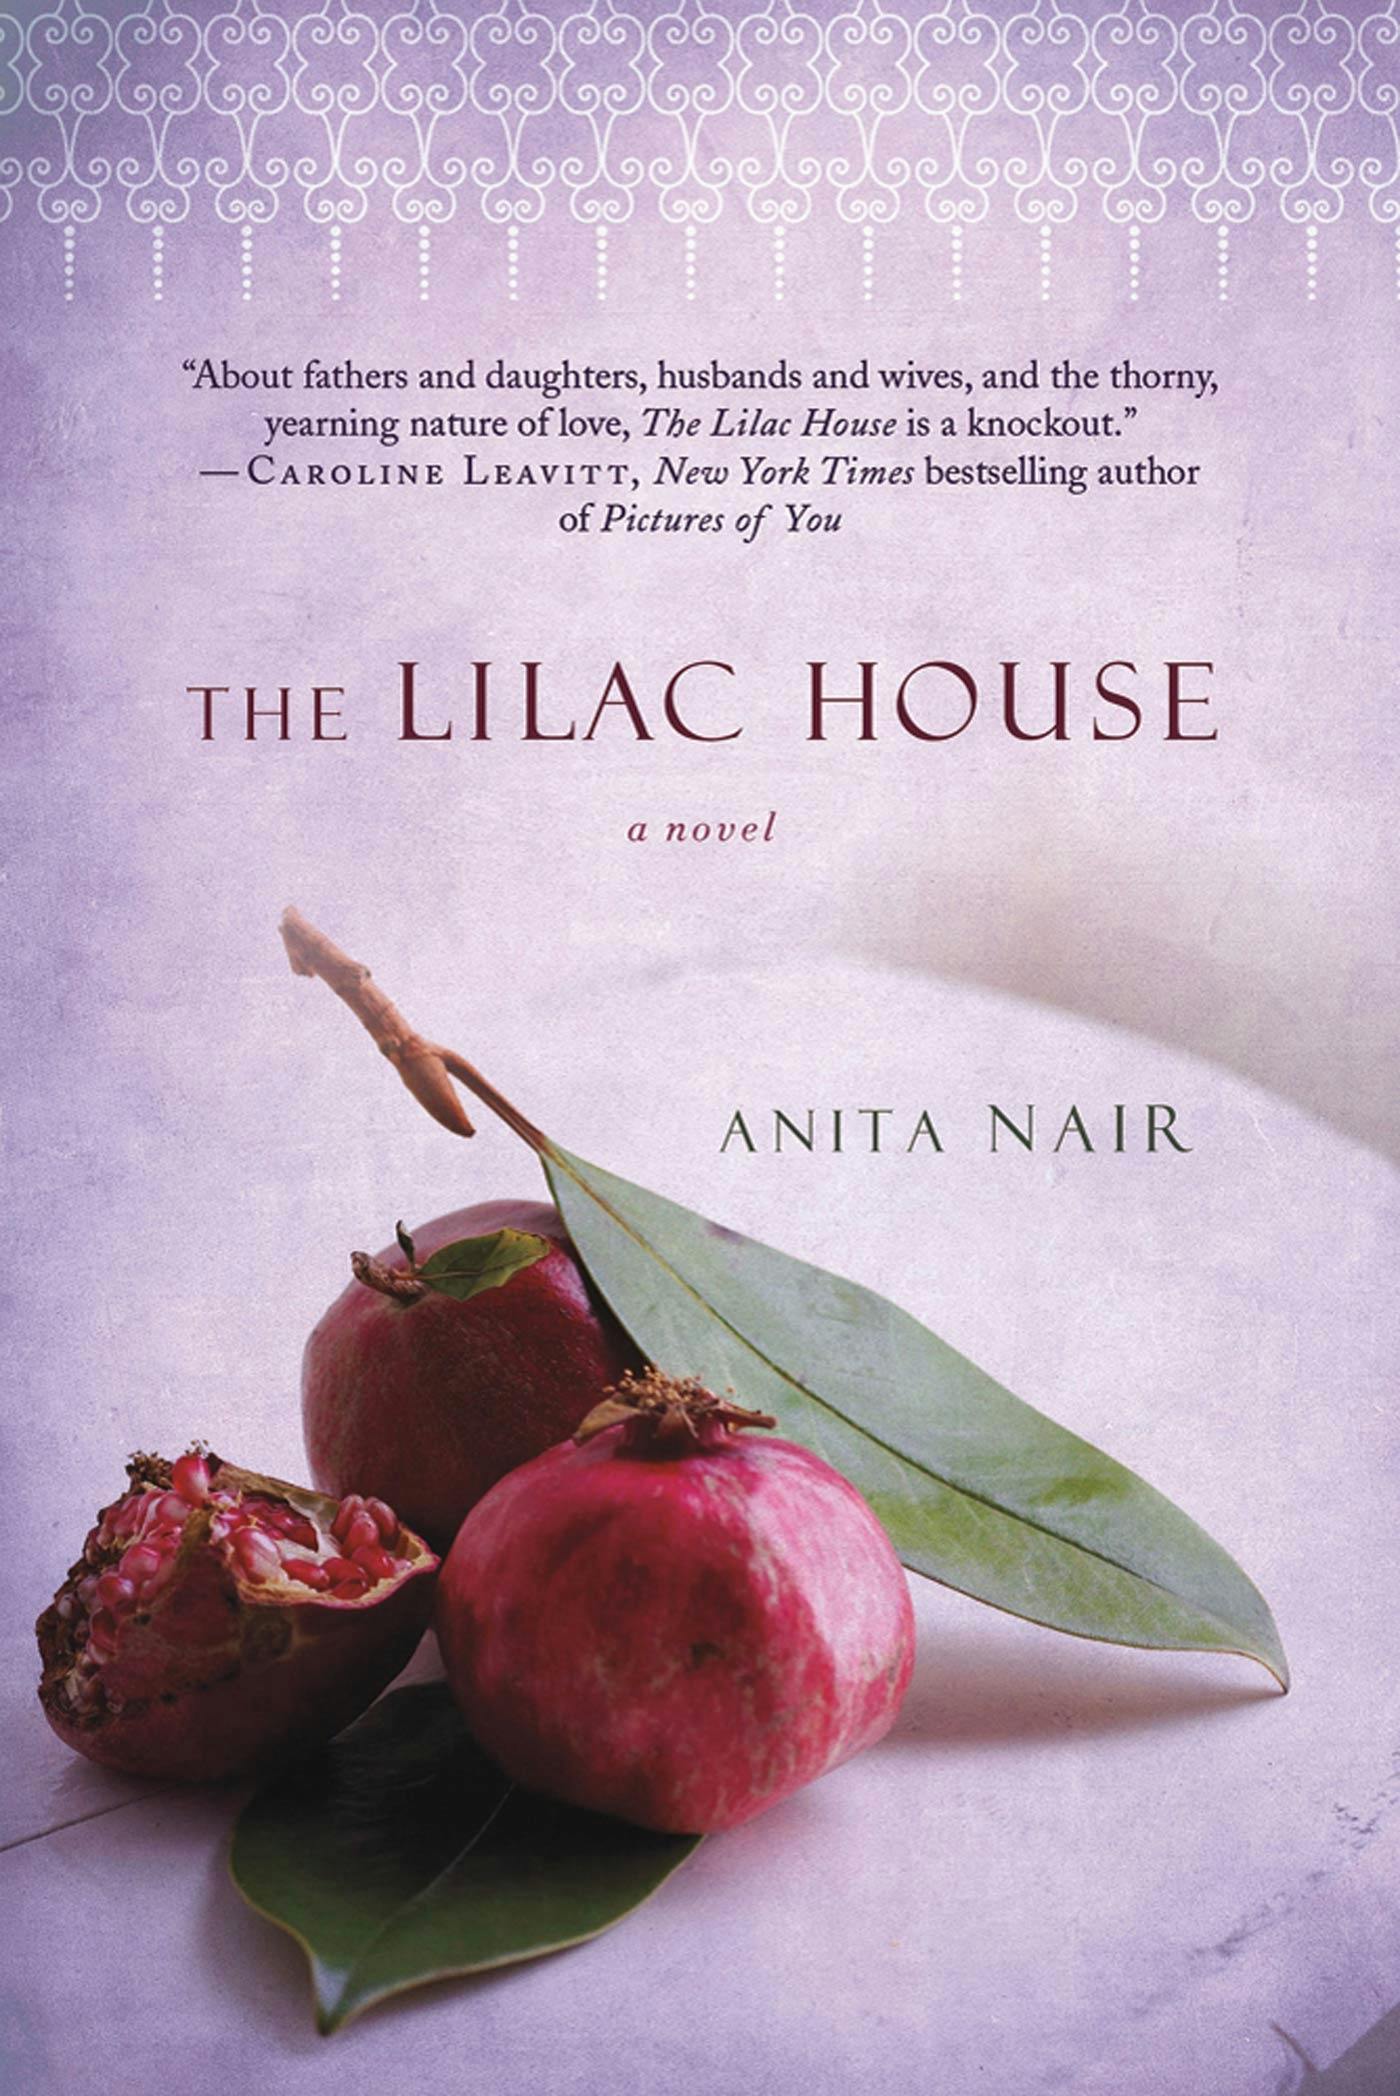 The Lilac House photo